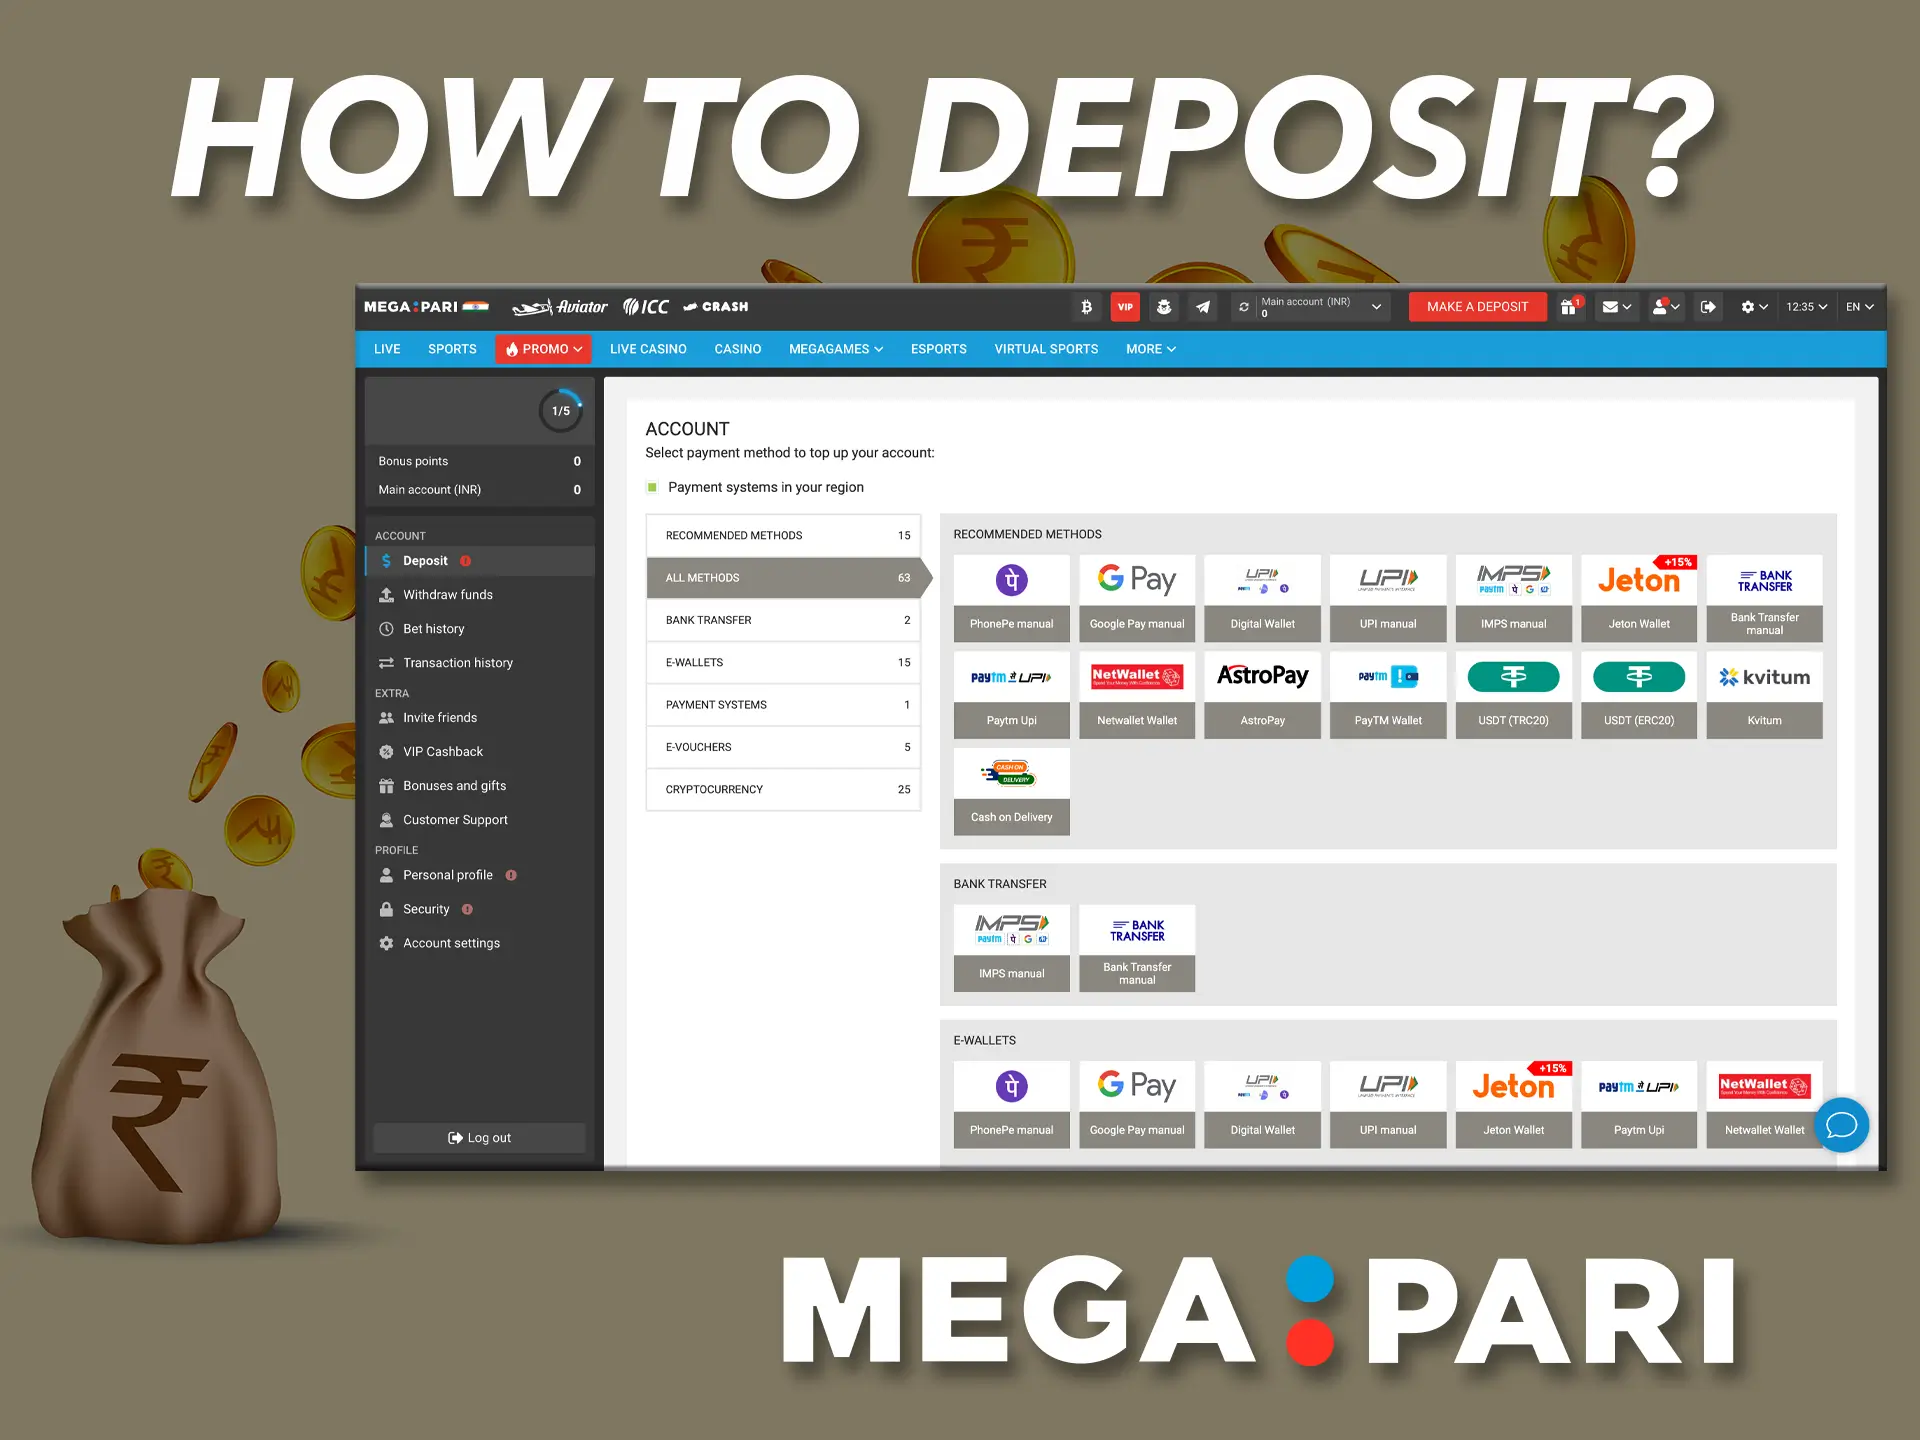 Make a deposit and play for fun on the Megapari website.